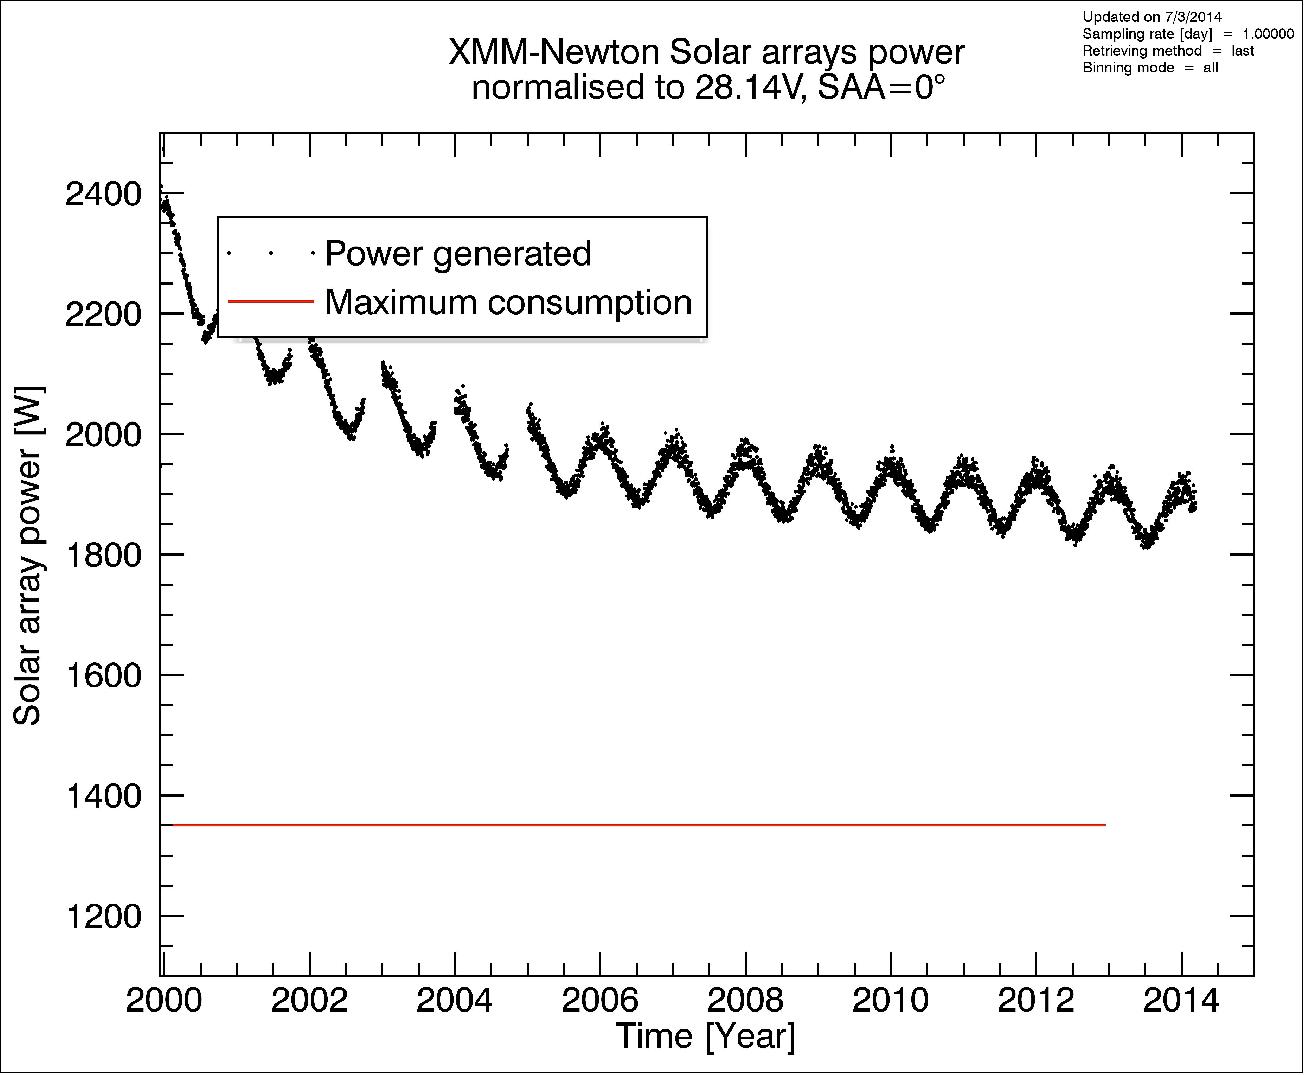 Figure 116: Power generated from the solar arrays. The sinusoidal variation is a seasonal effect where more power is generated in winter since the spacecraft is closer to the sun. The red line shows the peak power consumption. The power margin in 2014 is of the order of 600 W (image credit: ESA)